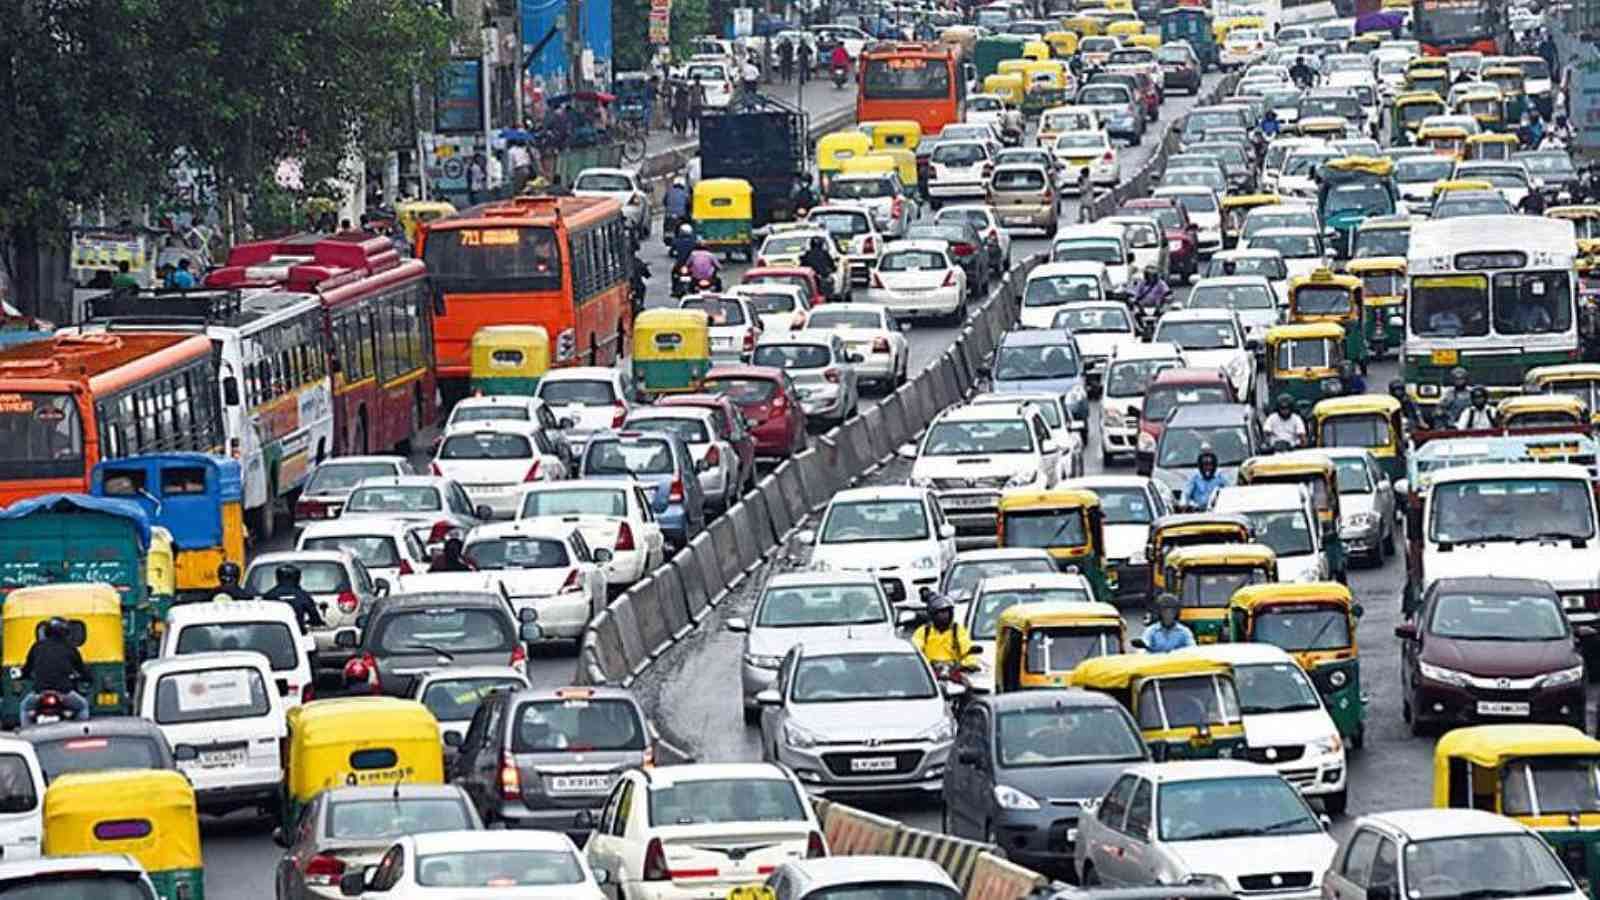 Millions of cars are added every year, leading to traffic congestion.